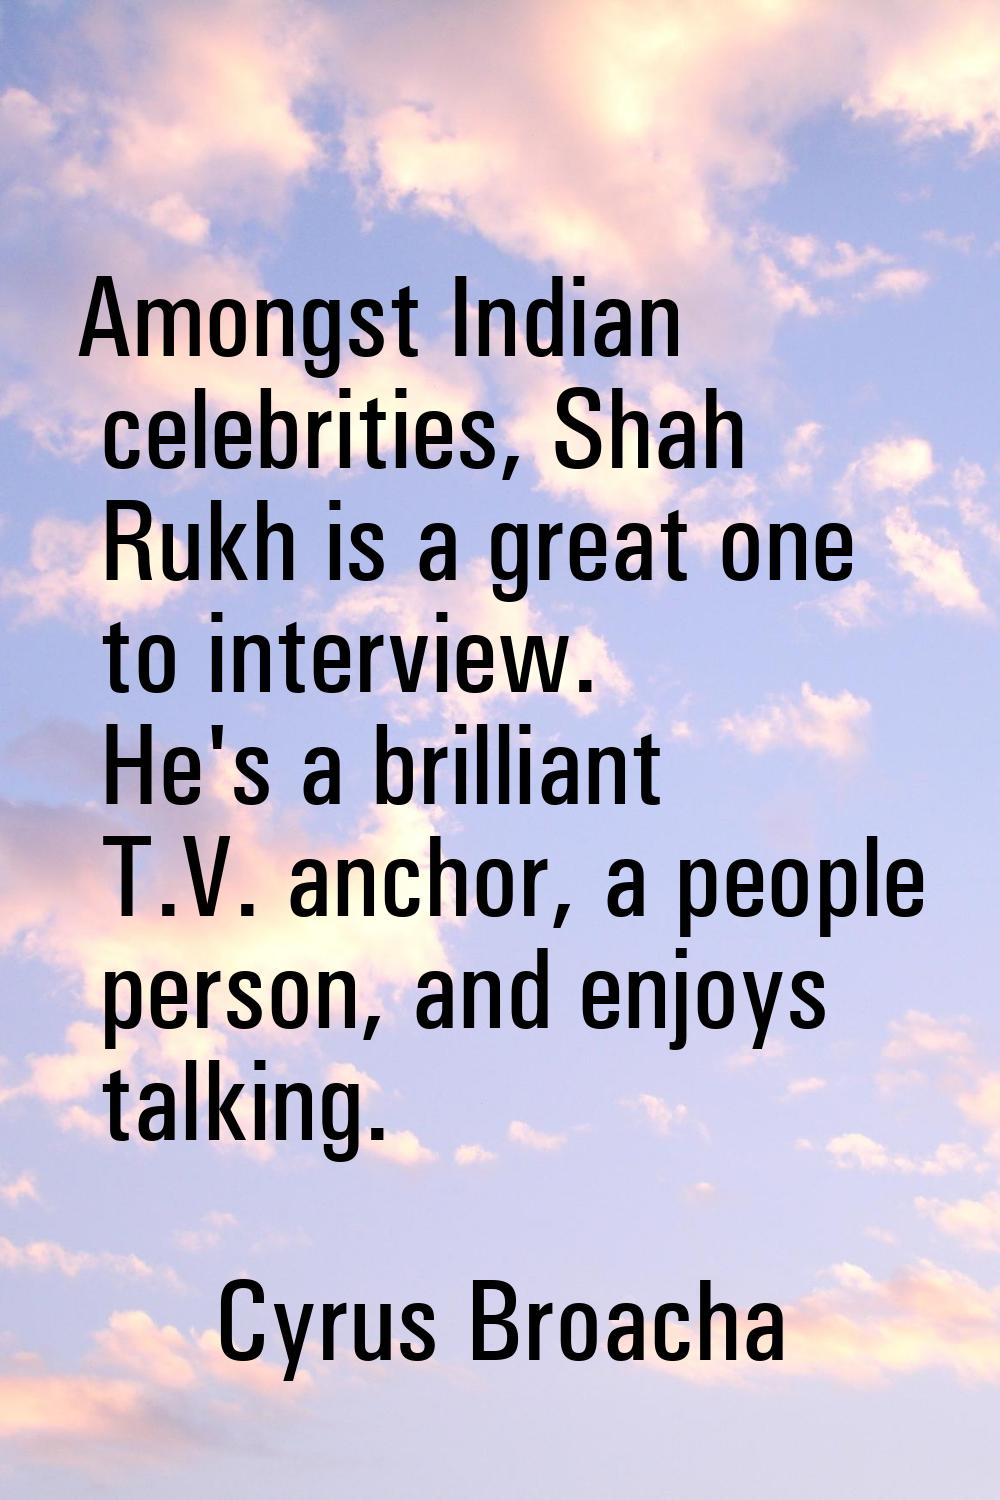 Amongst Indian celebrities, Shah Rukh is a great one to interview. He's a brilliant T.V. anchor, a 